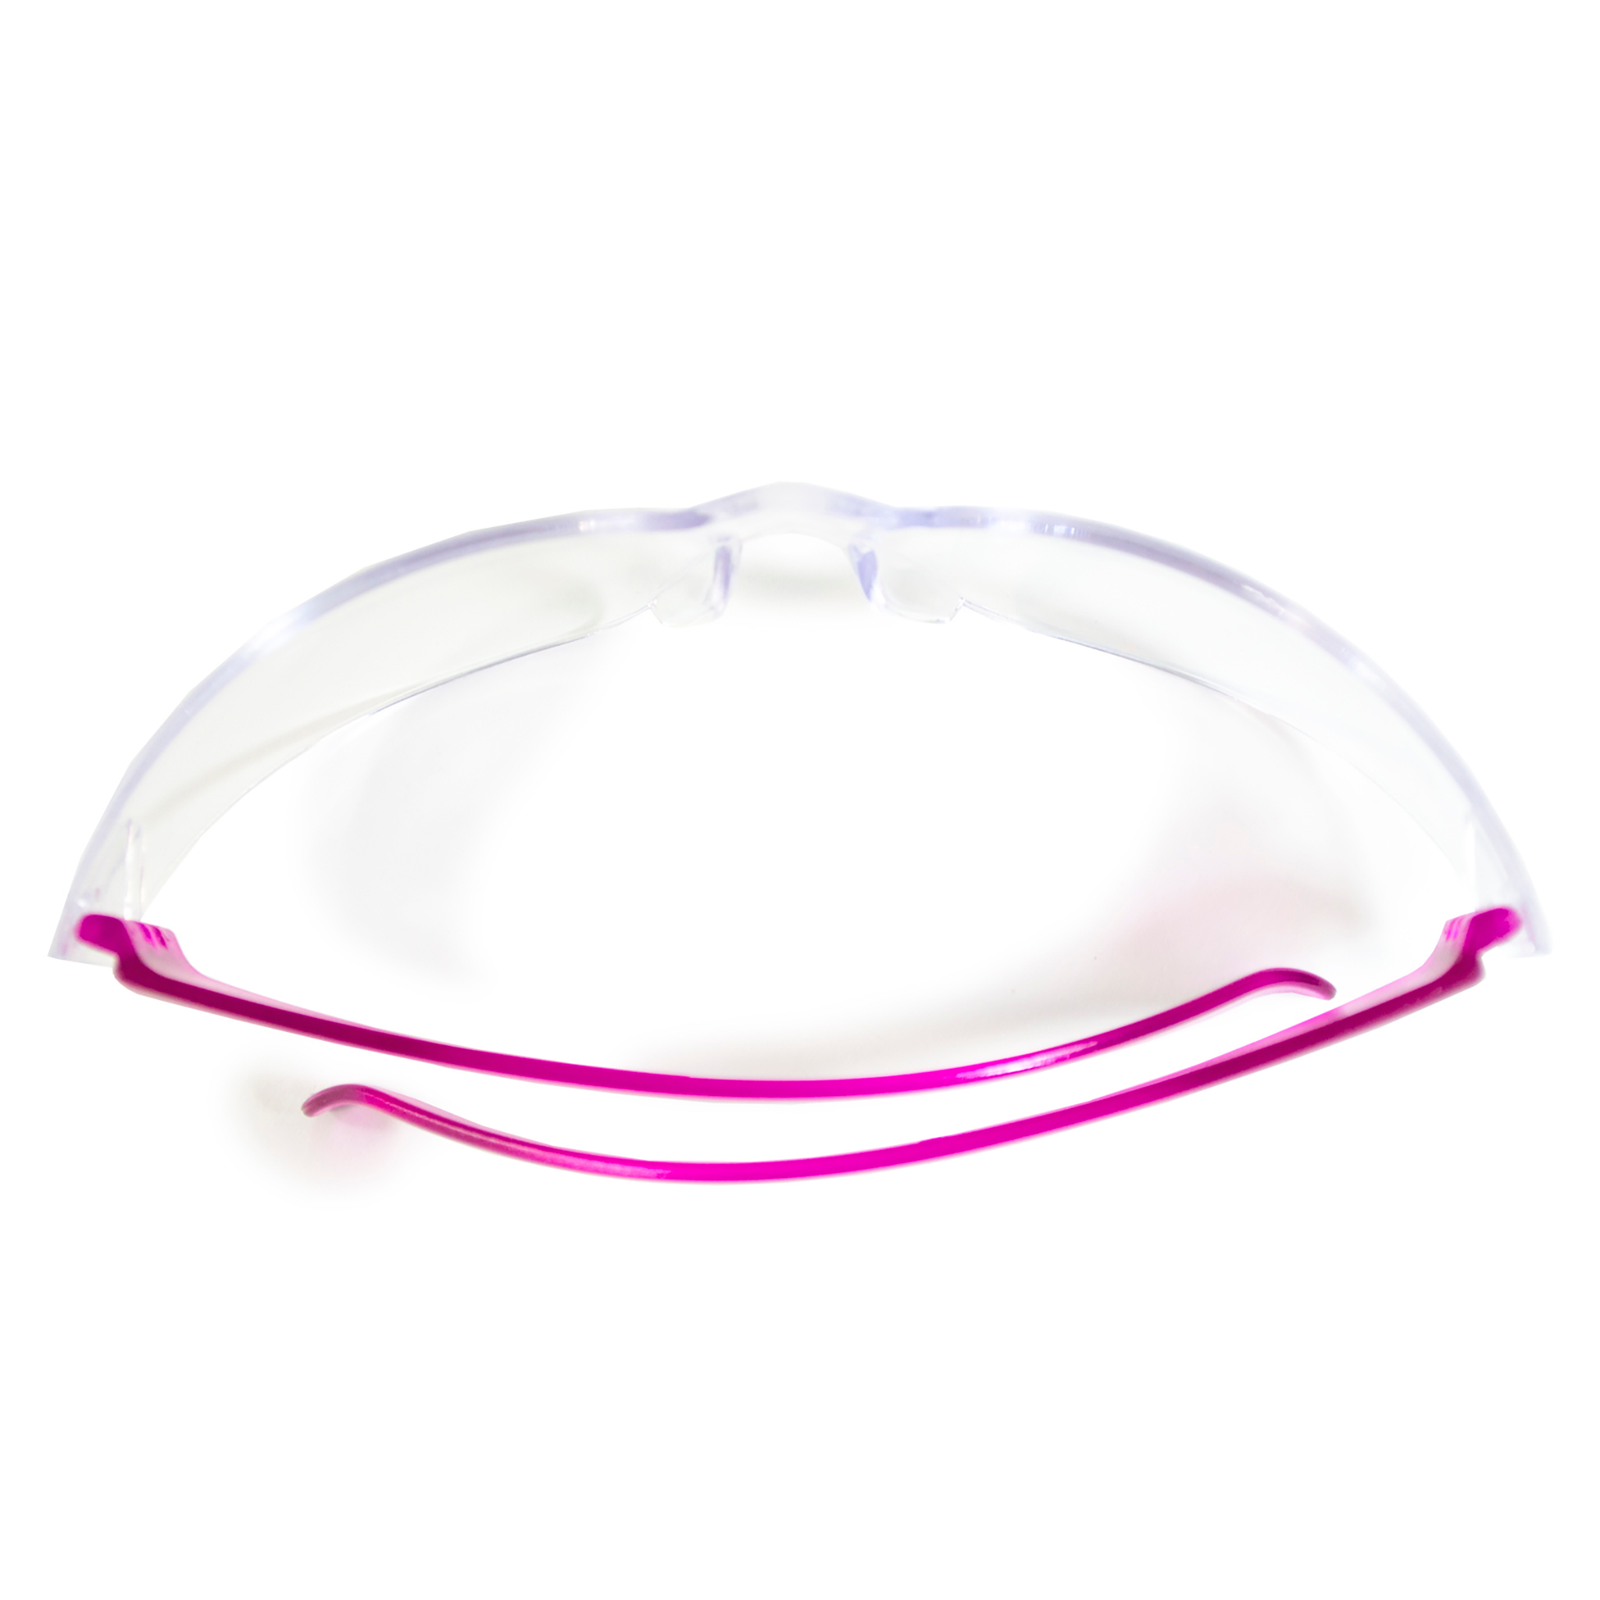 Pink and clear safety glasses for eye protection